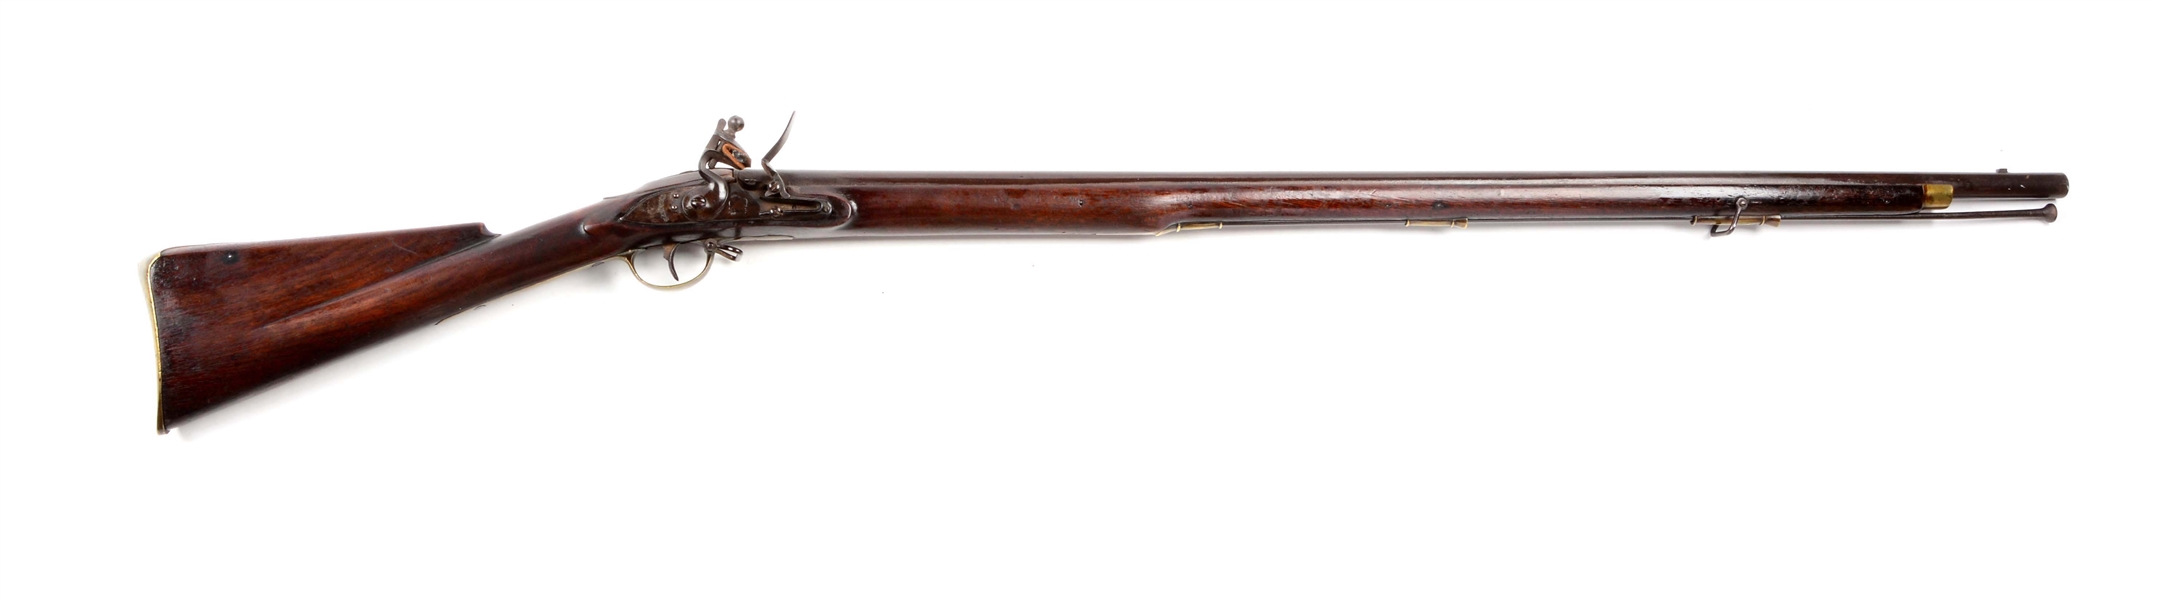 (A) ENGLISH FLINTLOCK MILITIA MUSKET BY SHARPE MADE FOR THE AMERICAN MARKET.